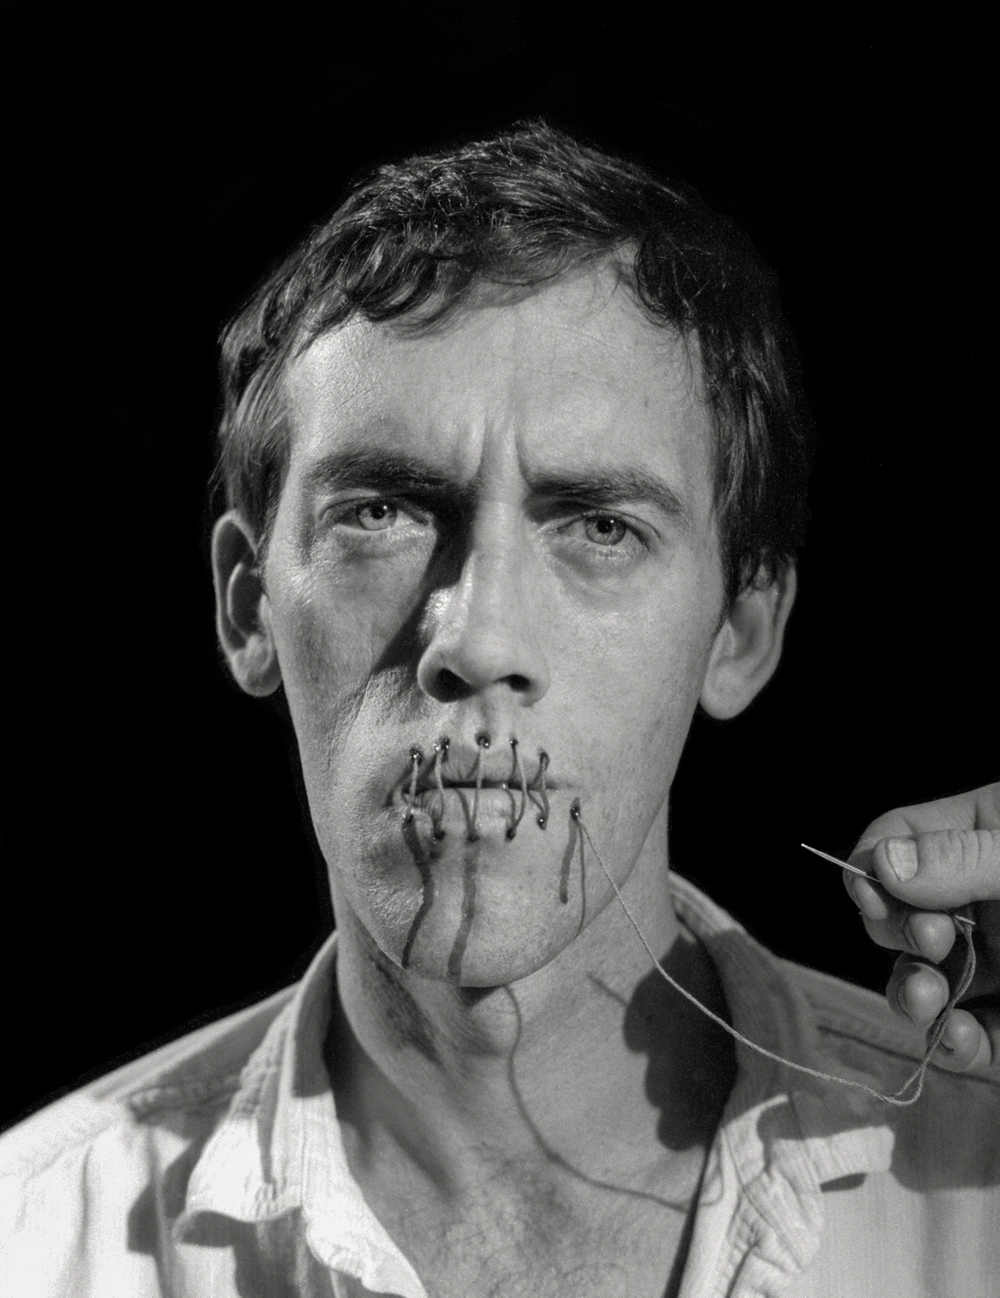 A work by David Wojnarowicz, Untitled (Silence=Death), taken from 1990 documentary of the same name by Rosa van Prauheim.